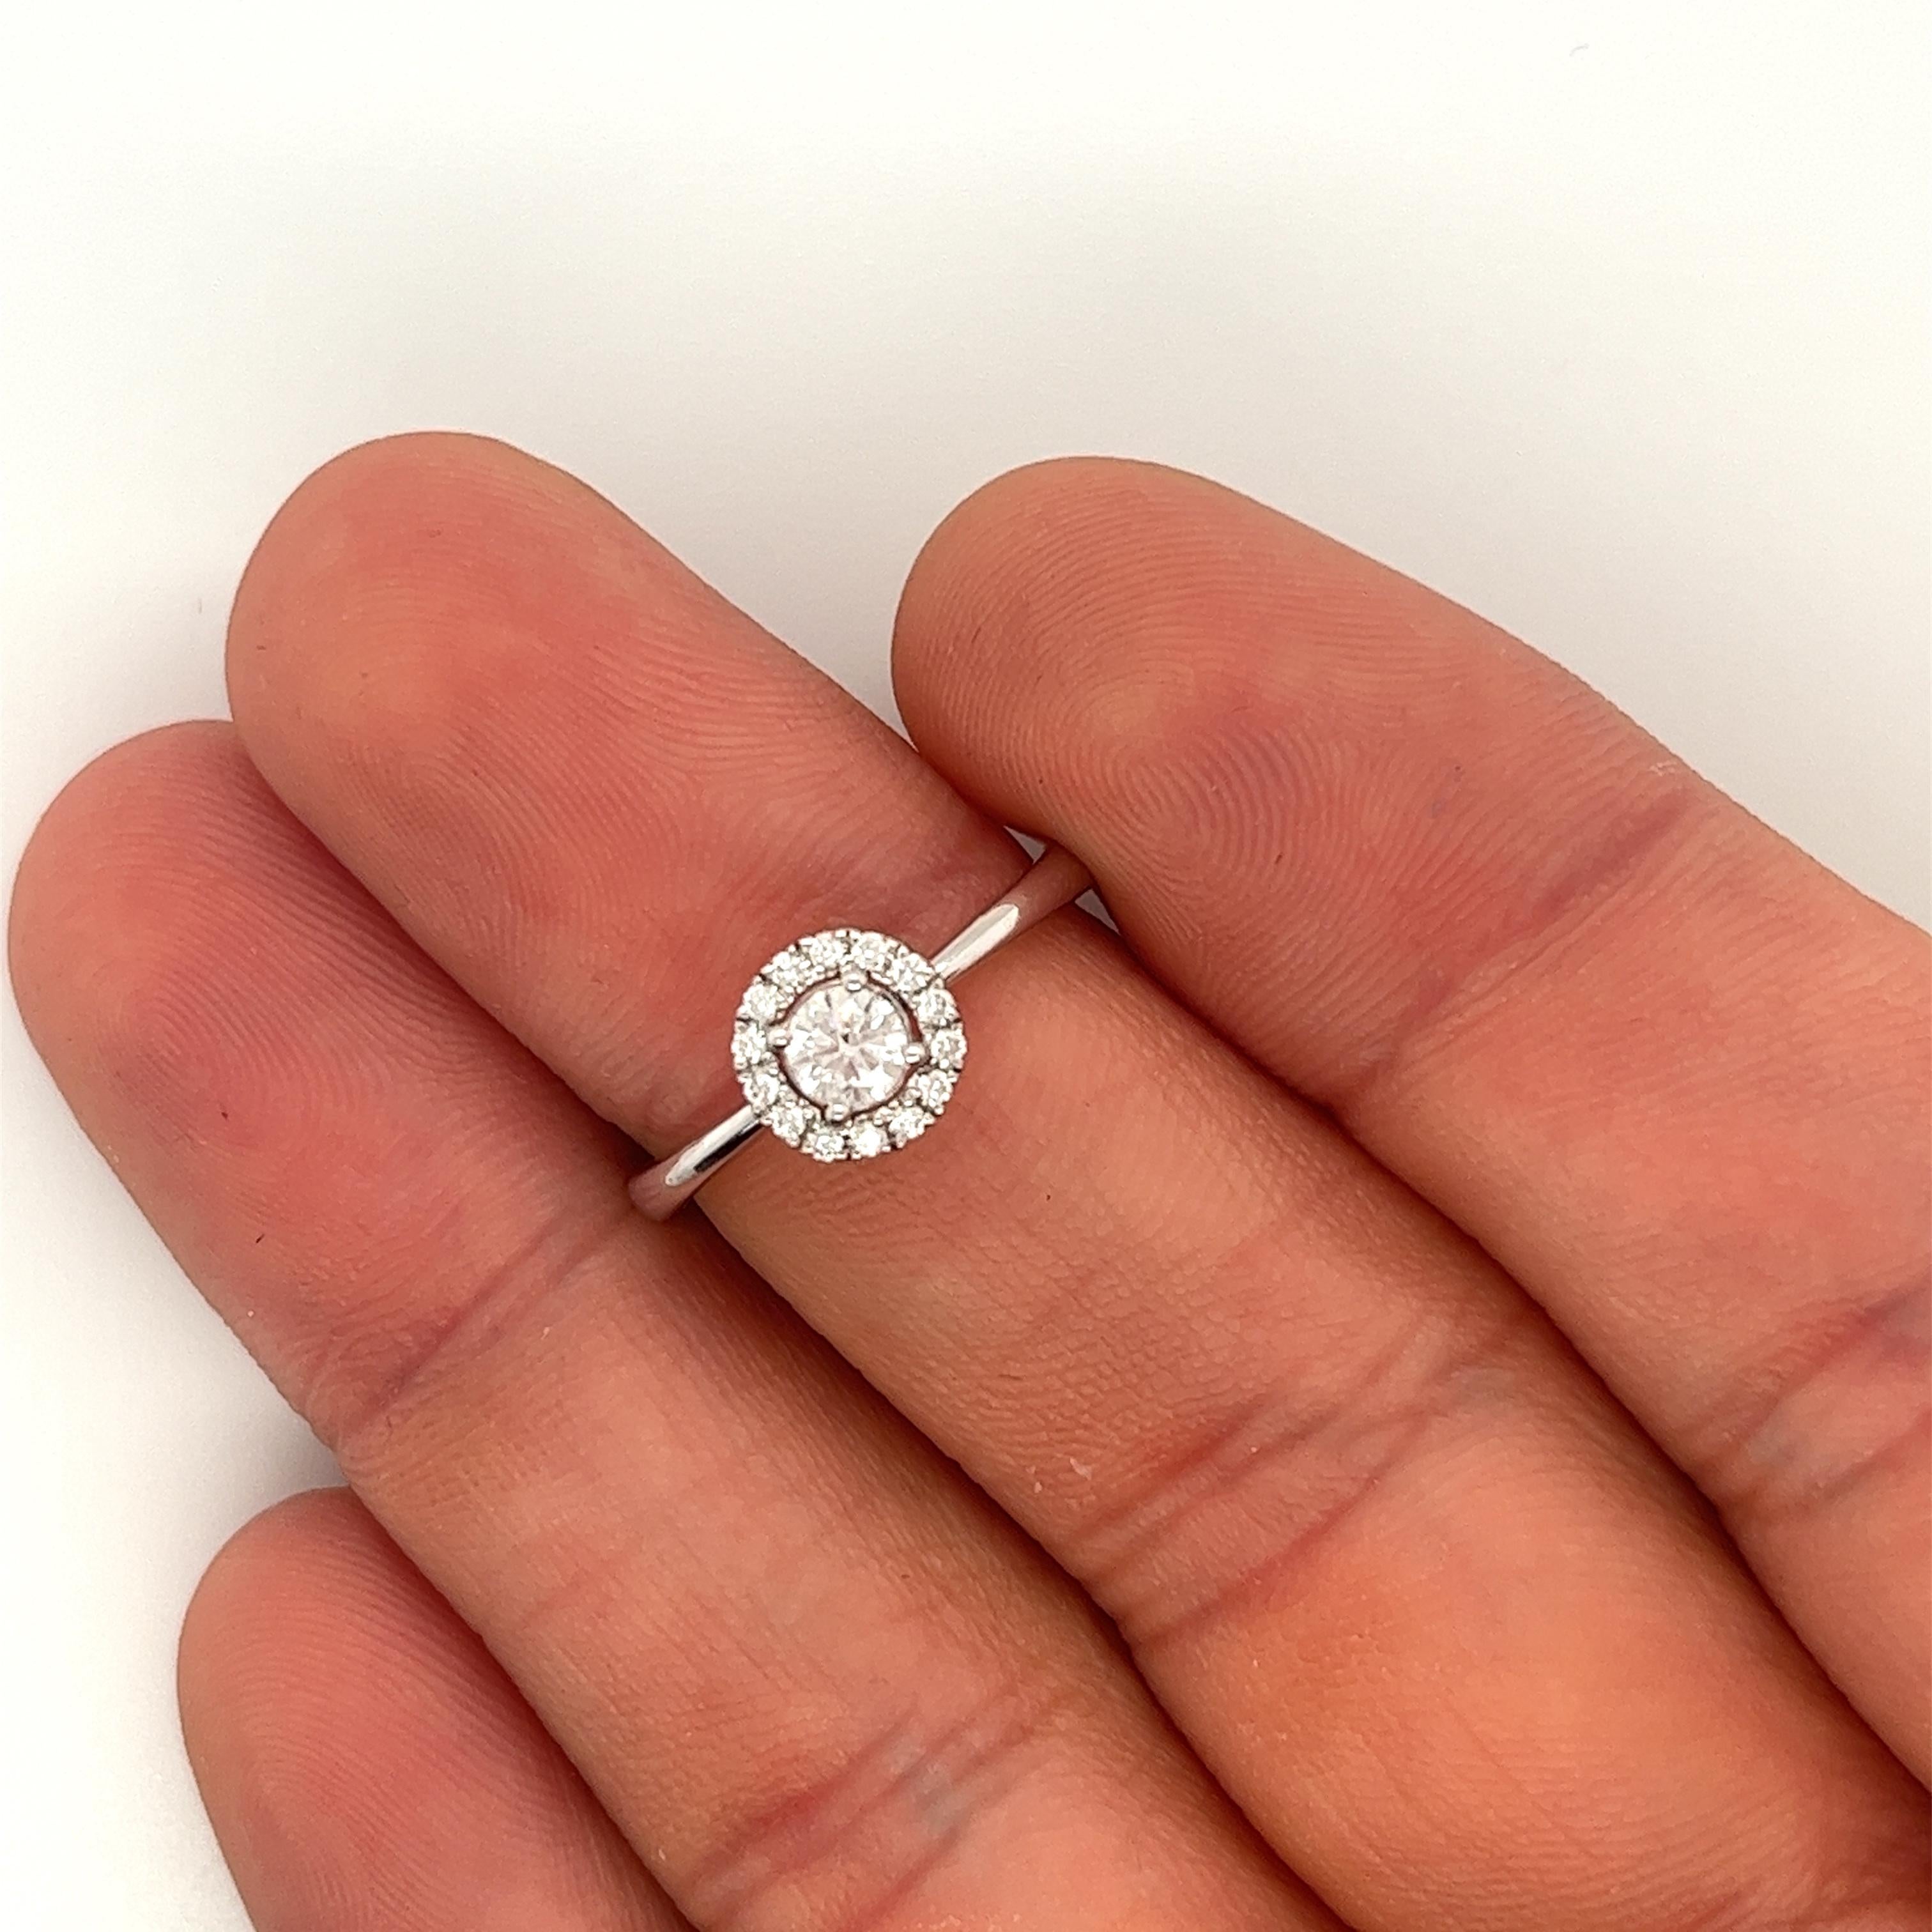 Natural 0.22 Carat Round Cut Diamond Ring in 14K White Gold. Featuring a dazzling 0.22 carat Round Cut Diamond as its centerpiece, color F-G and SI1-SI2 grade clarity. Sized at 6.5, this ring boasts a classic 2MM band, 7.5MM halo, and a pinches ring